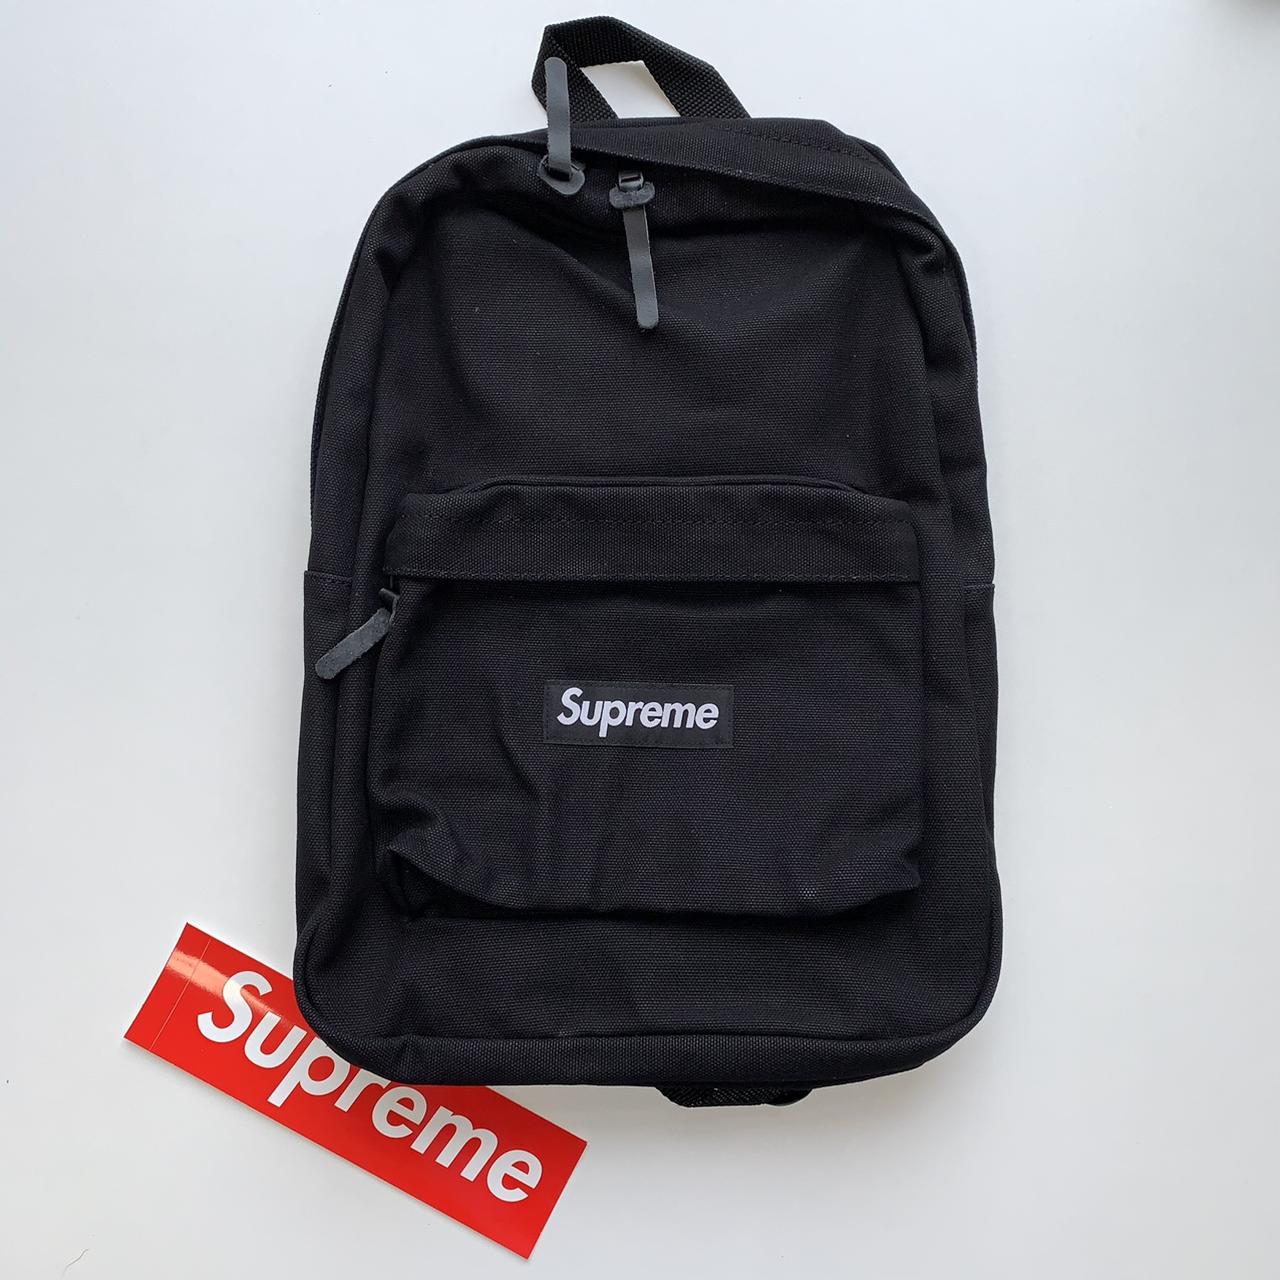 Supreme FW/20 Backpack HEAVILY WORN WITH TEARS AND - Depop